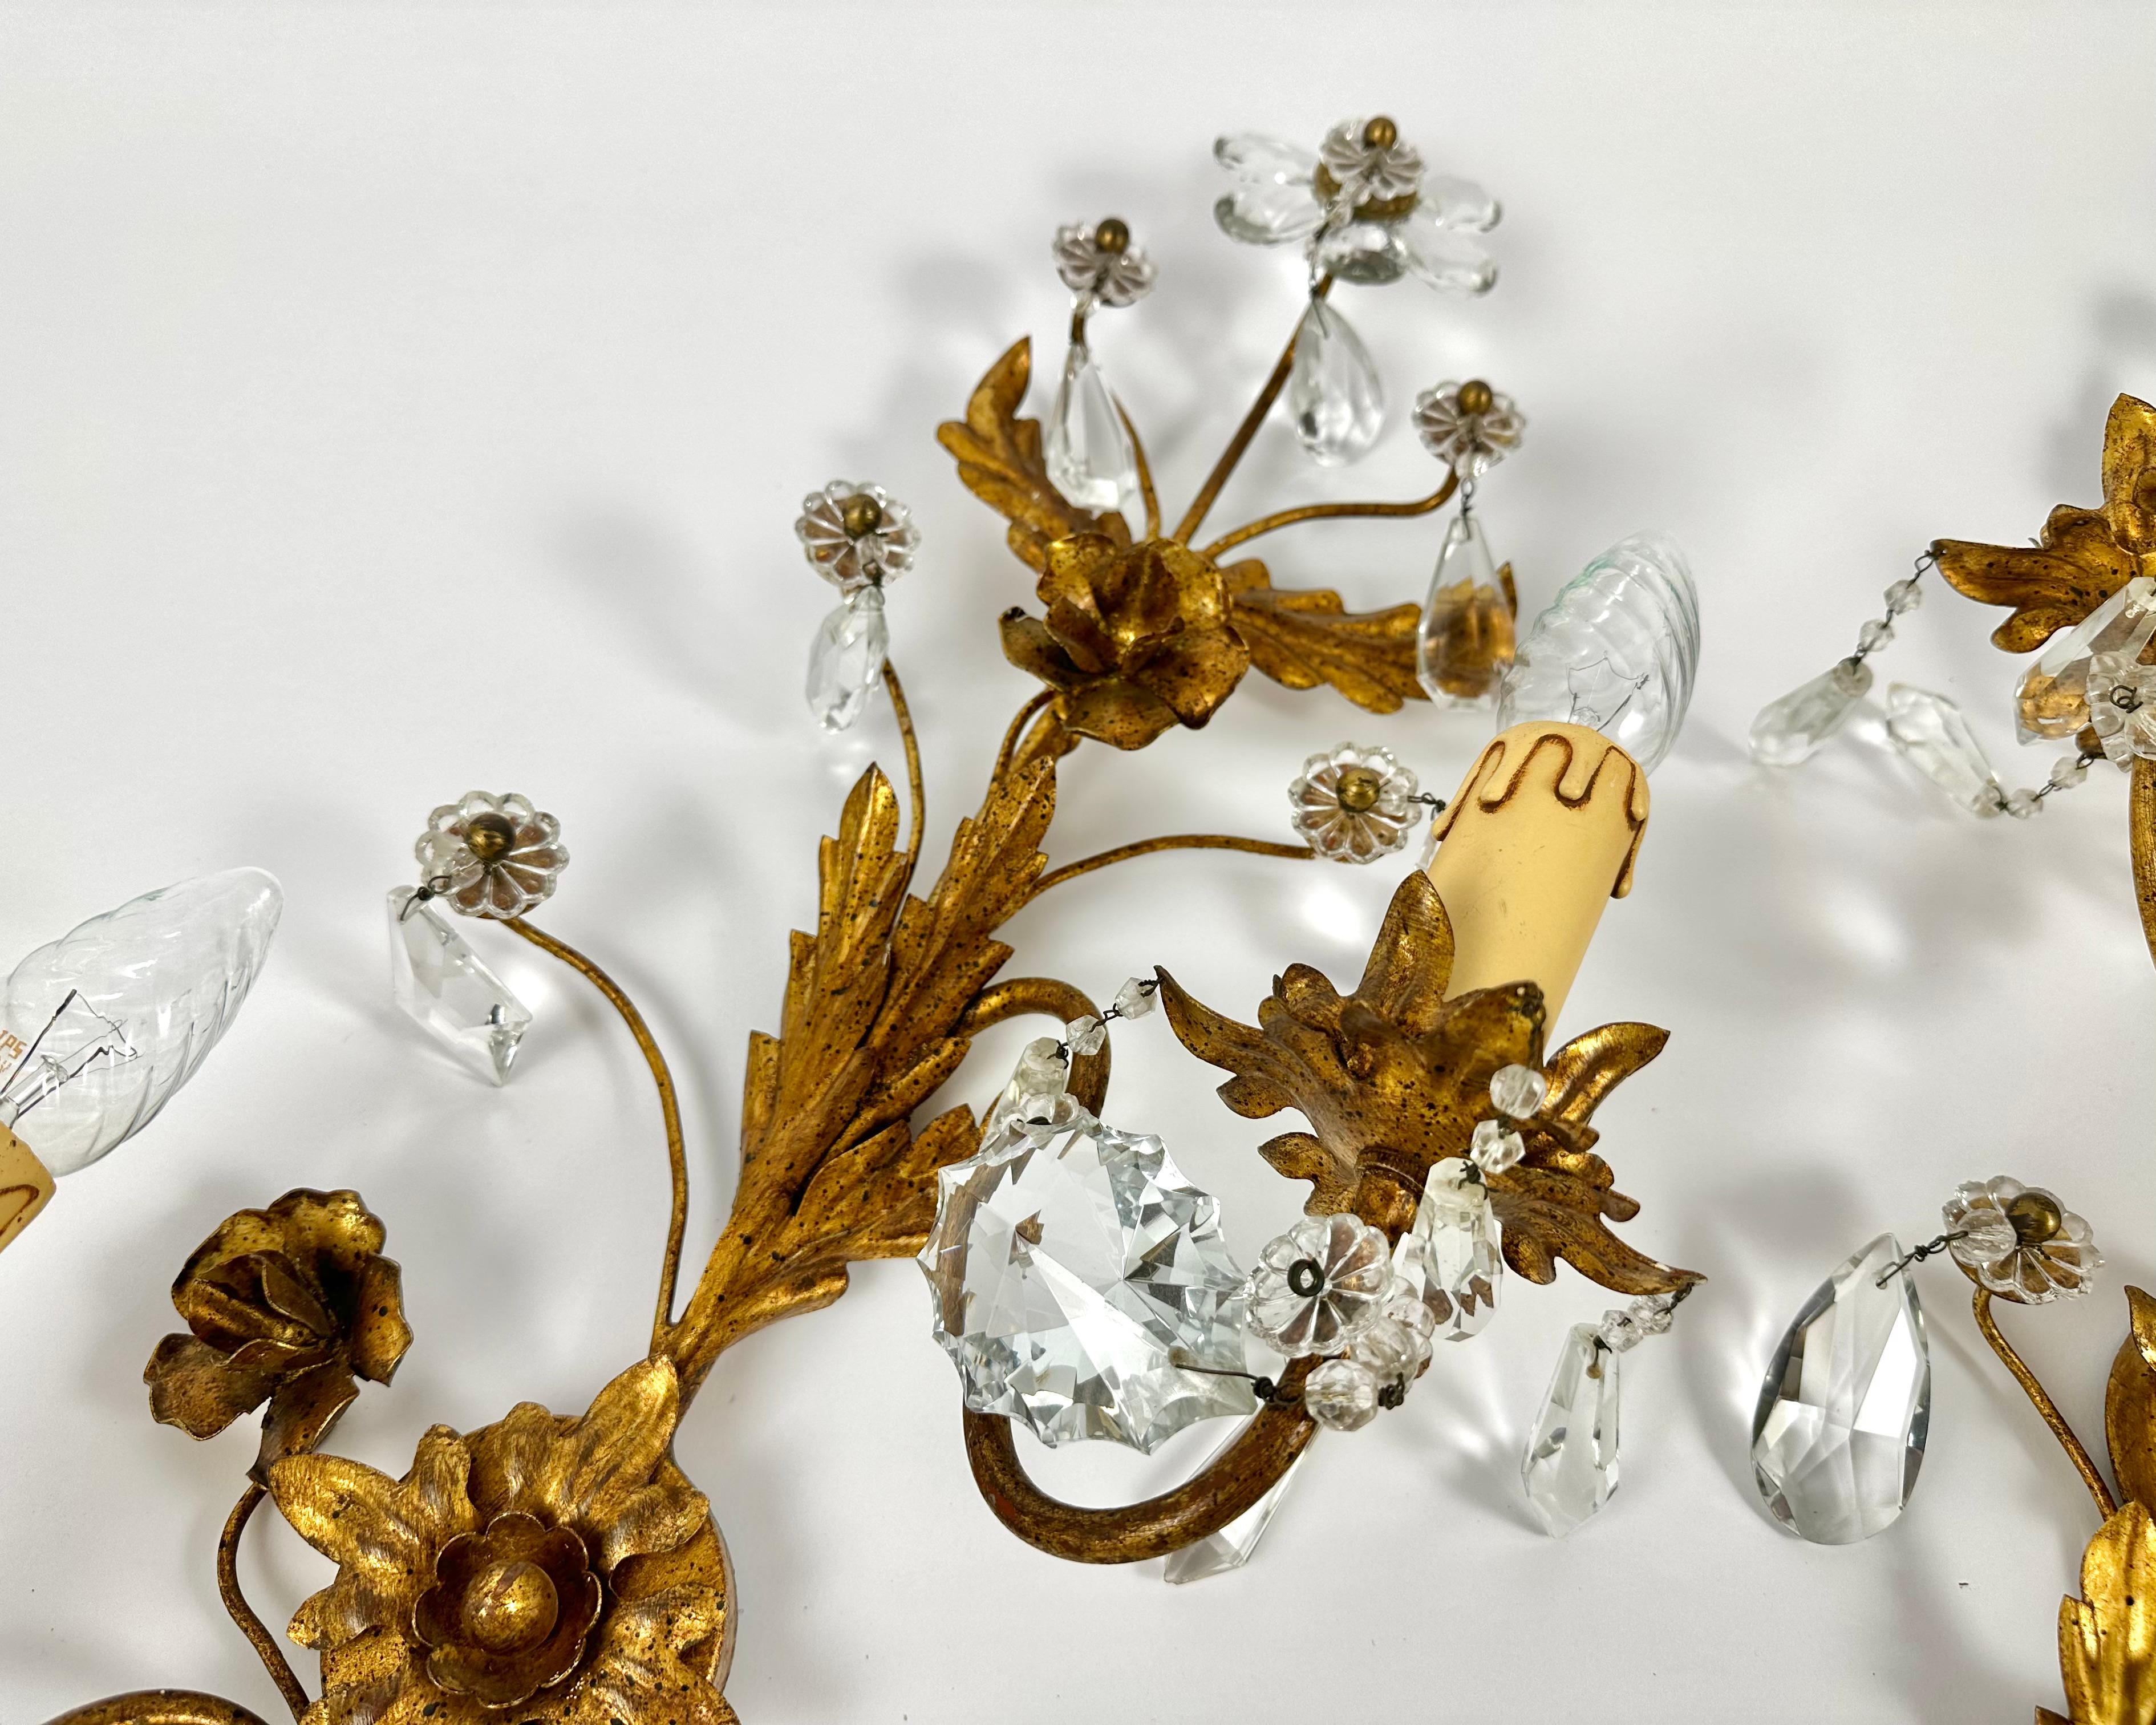 Beautiful Large Florentine Sconces from the 1950s with two bases on each, featuring crystal daisy flowers and golden curved leaves.

Manufactured in Italy.

Very nice design with lots of details and high quality processing.

The whole sconce is made